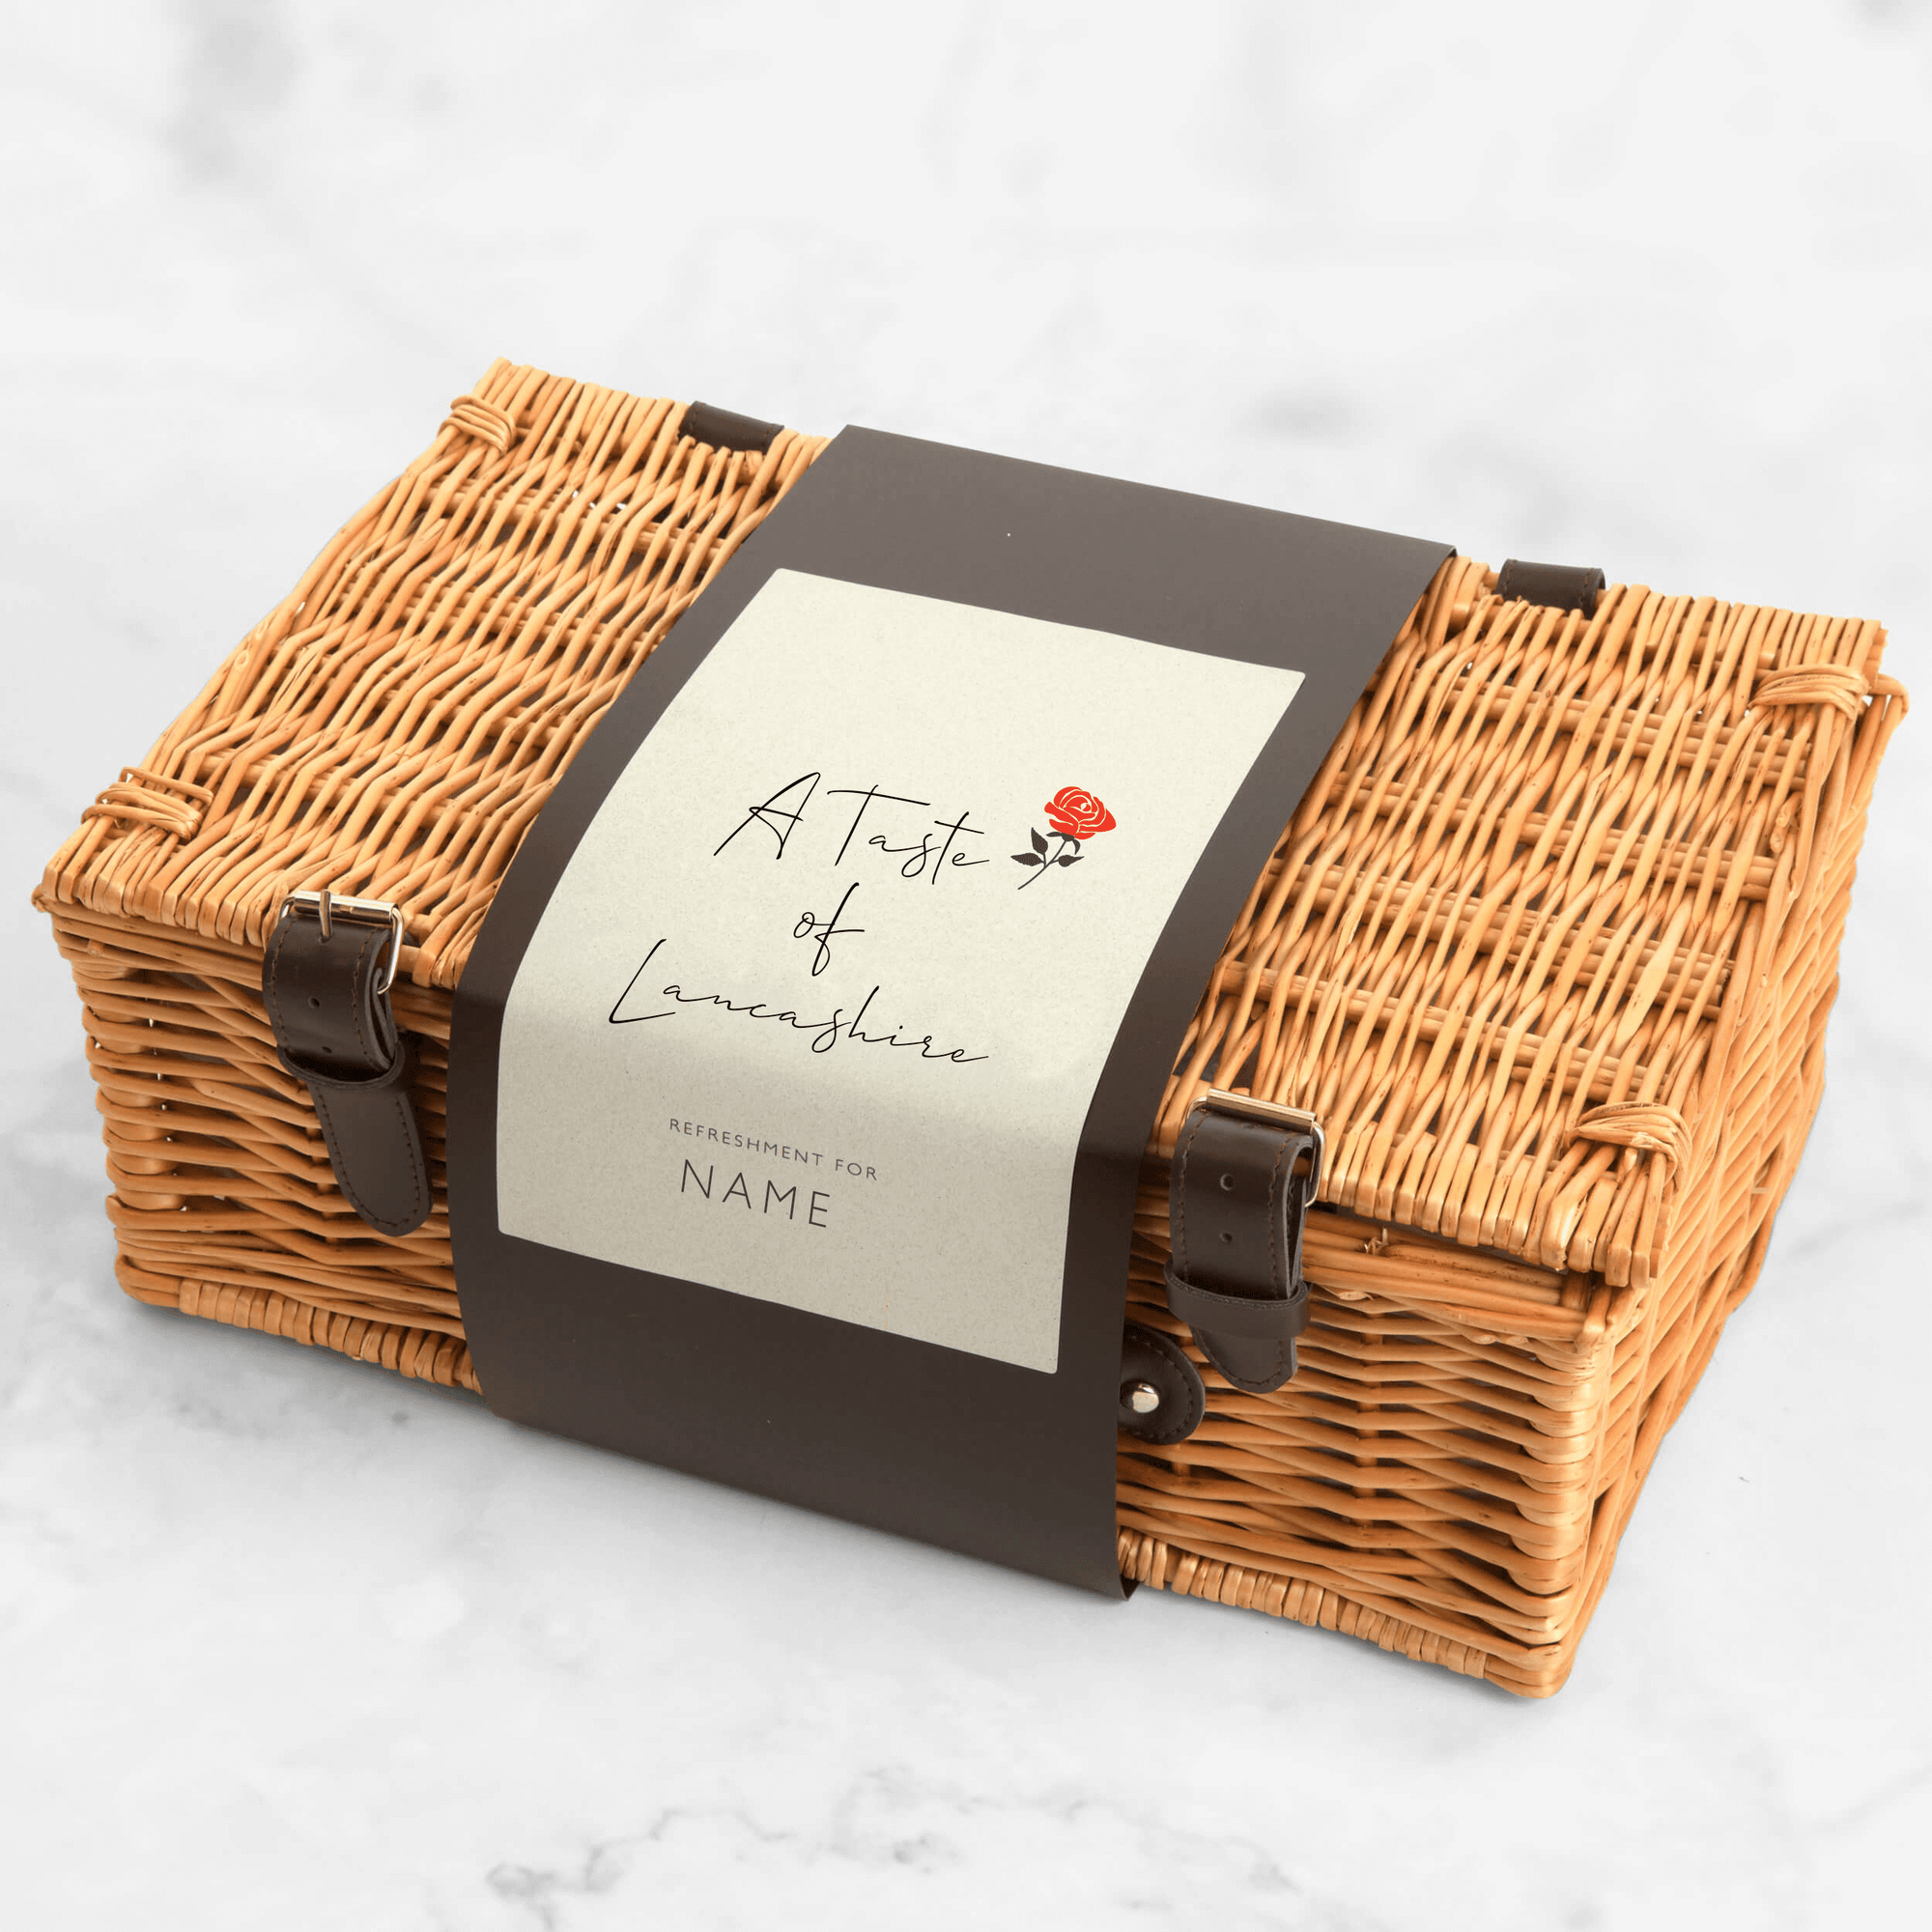 Personalised Lancashire Hamper full of locally sourced produce